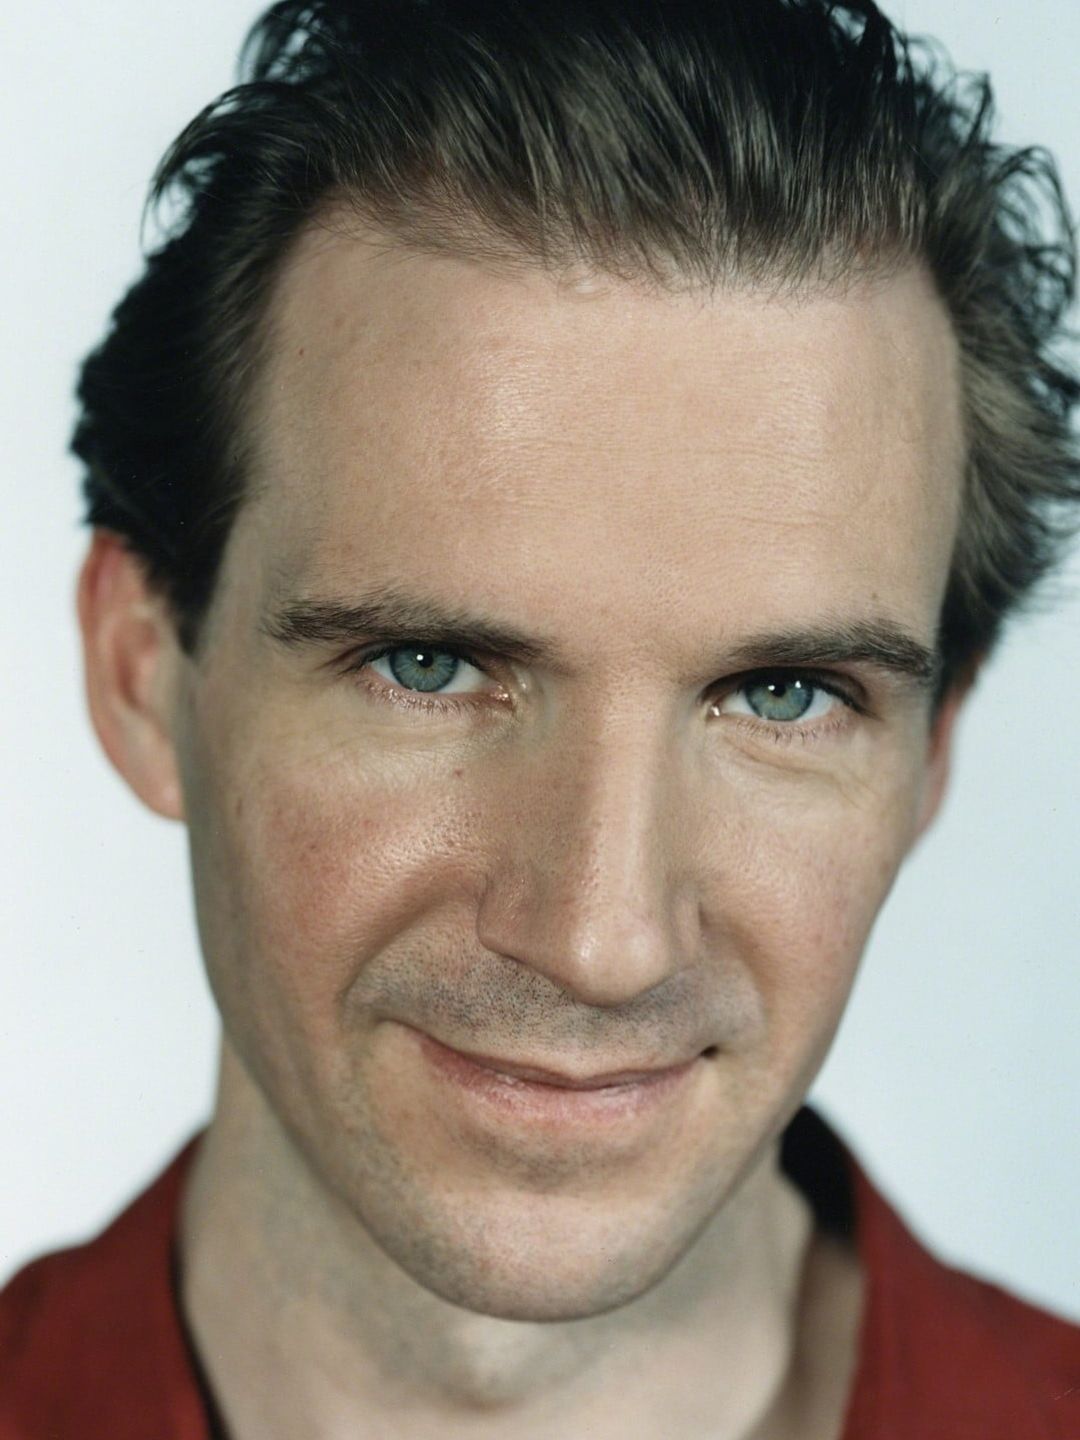 Ralph Fiennes current look